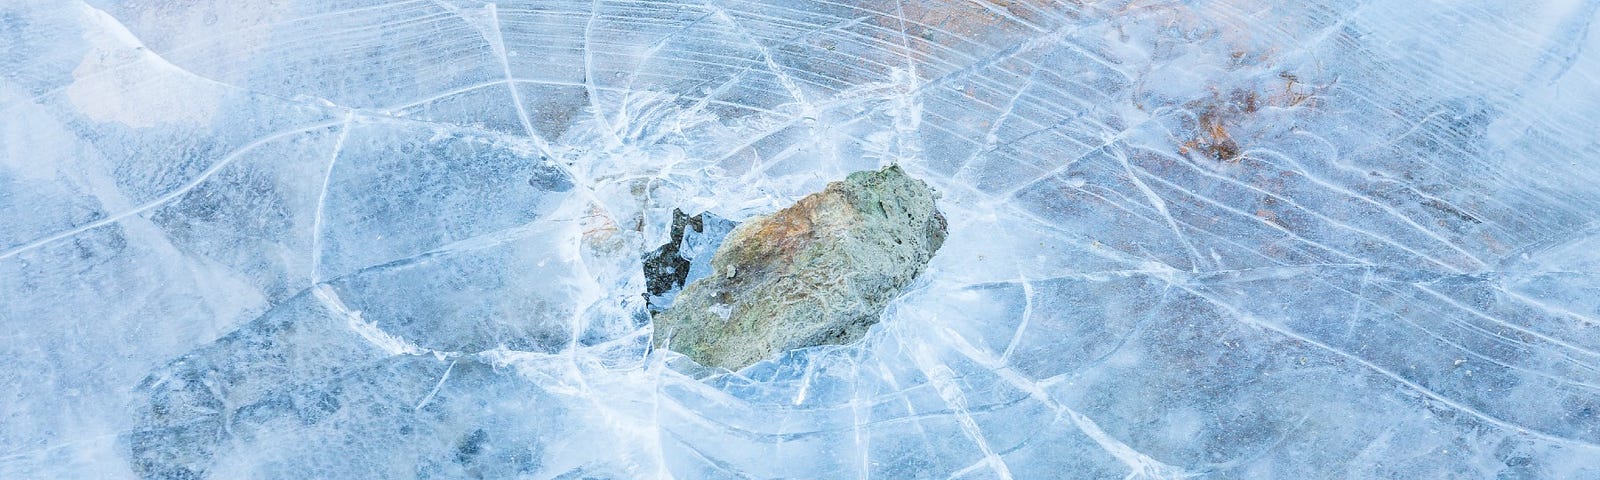 A rock breaking the ice on a frozen lake. This picture descriptive of the phrase “Ice Breaker”.